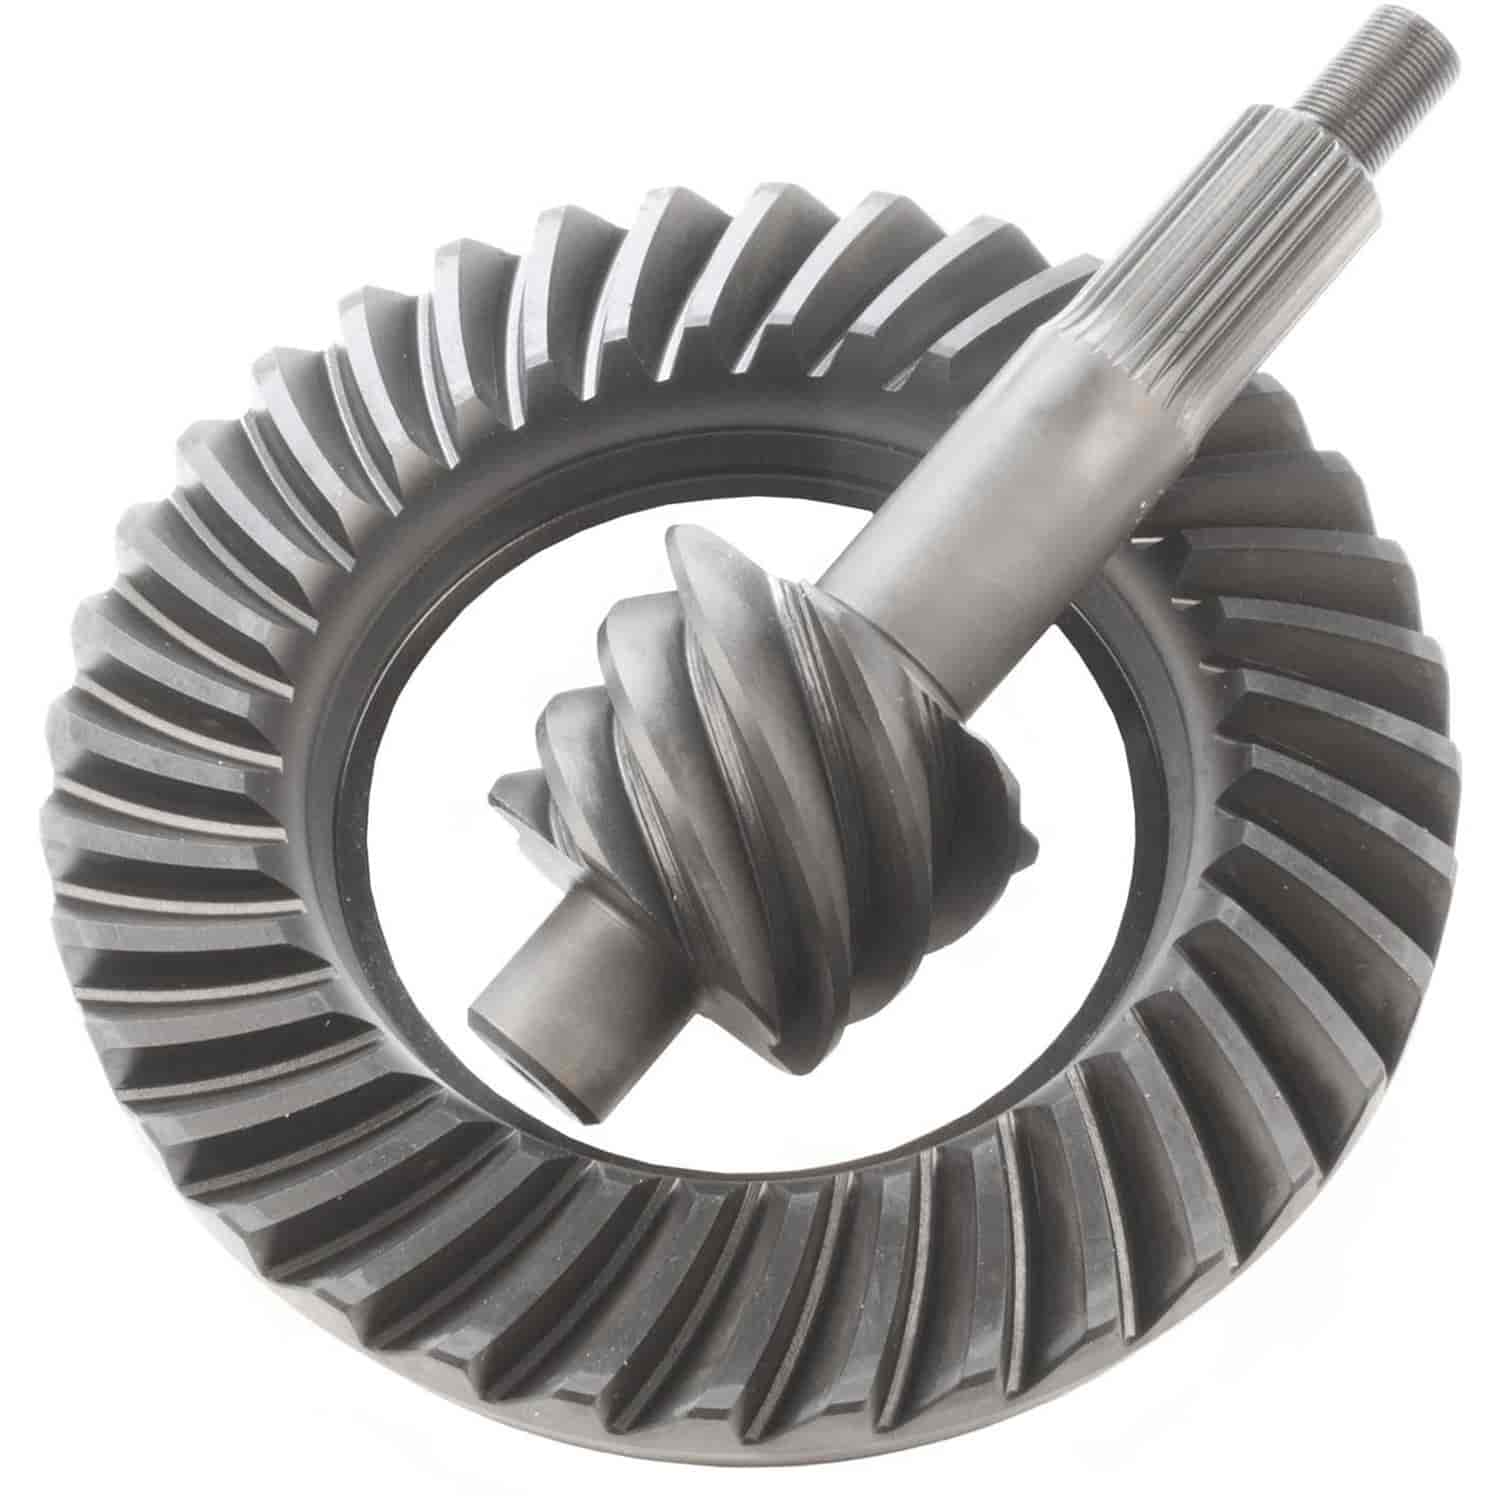 Excel Ring & Pinion Gear Set Ford 9" Ratio: 6.20